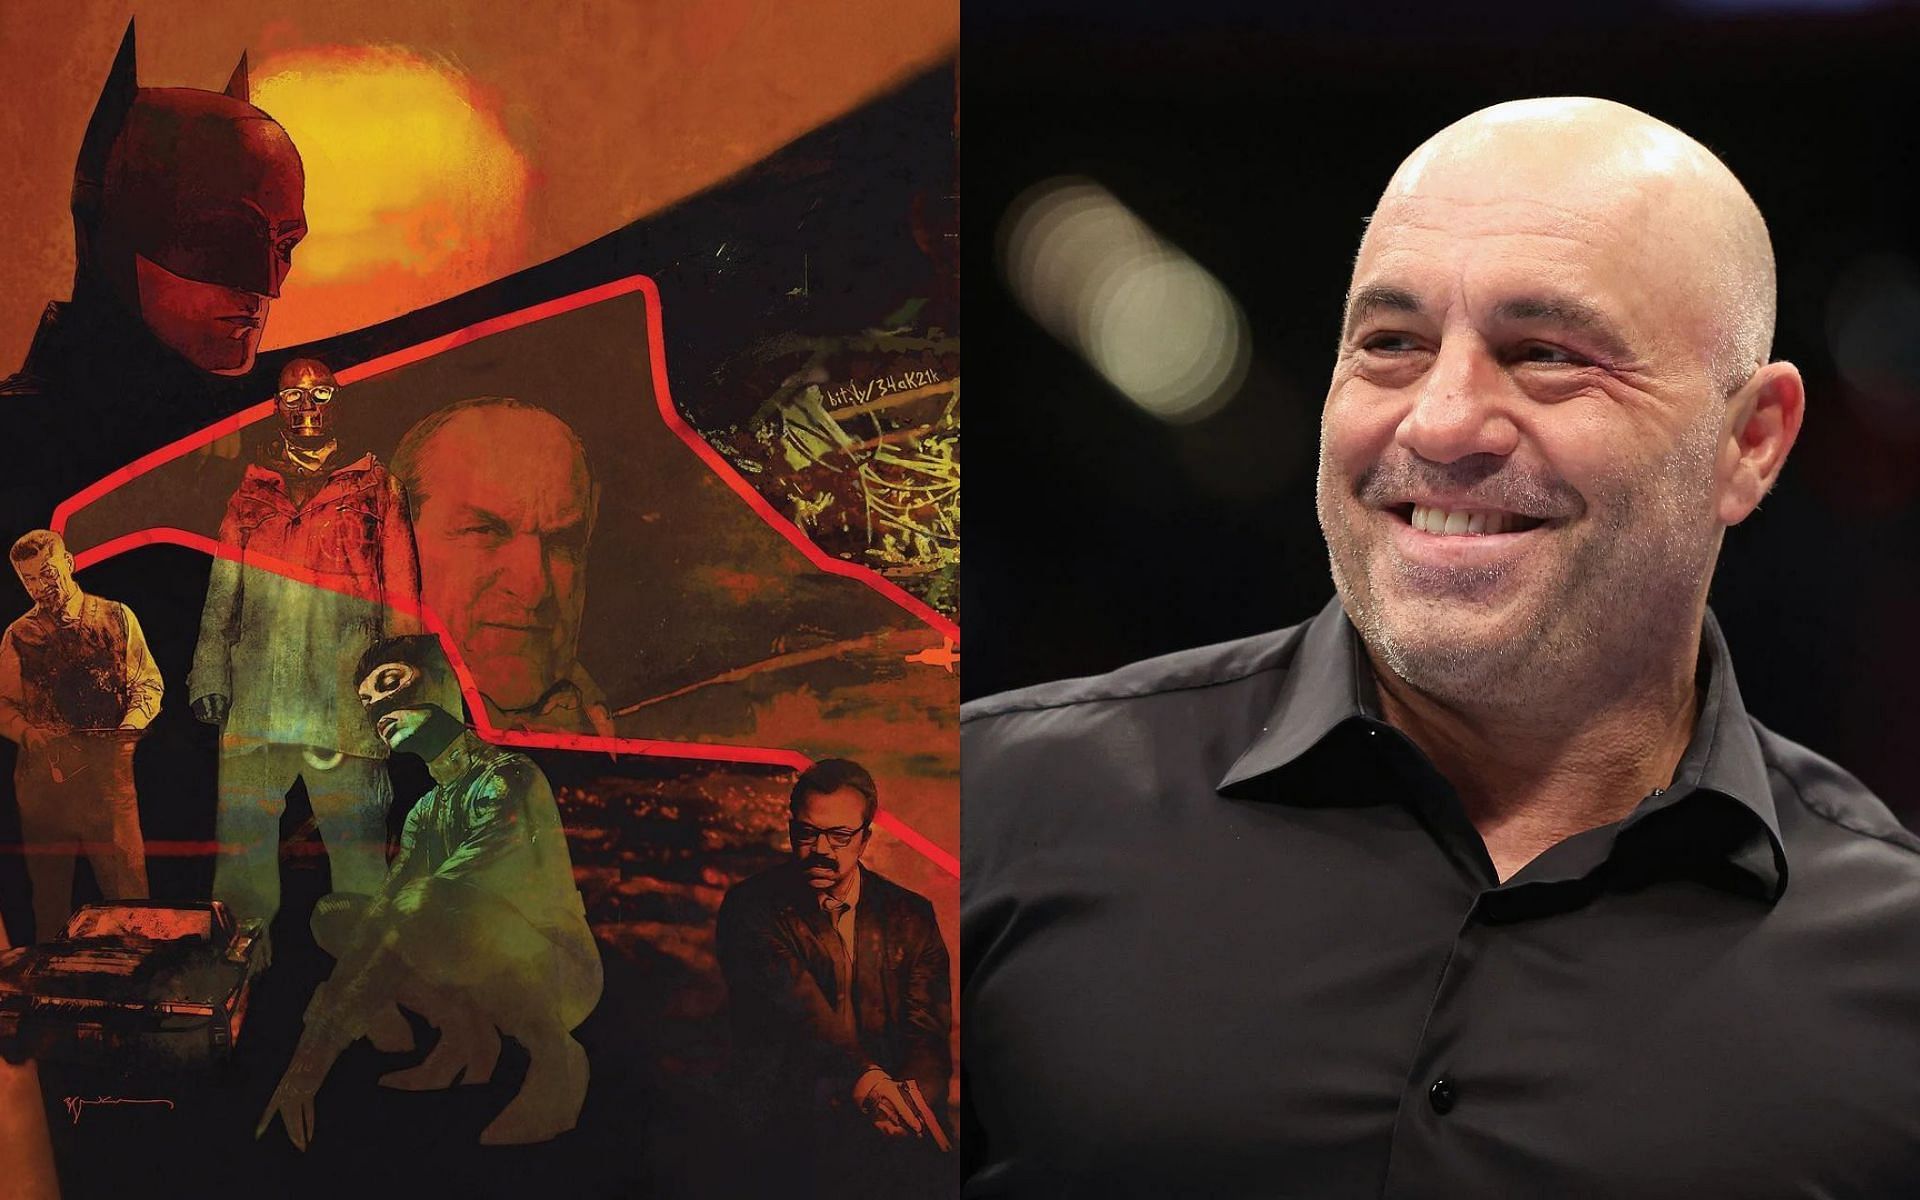 The Batman movie (left) and Joe Rogan (right) [Images courtesy of @thebatman and Getty]